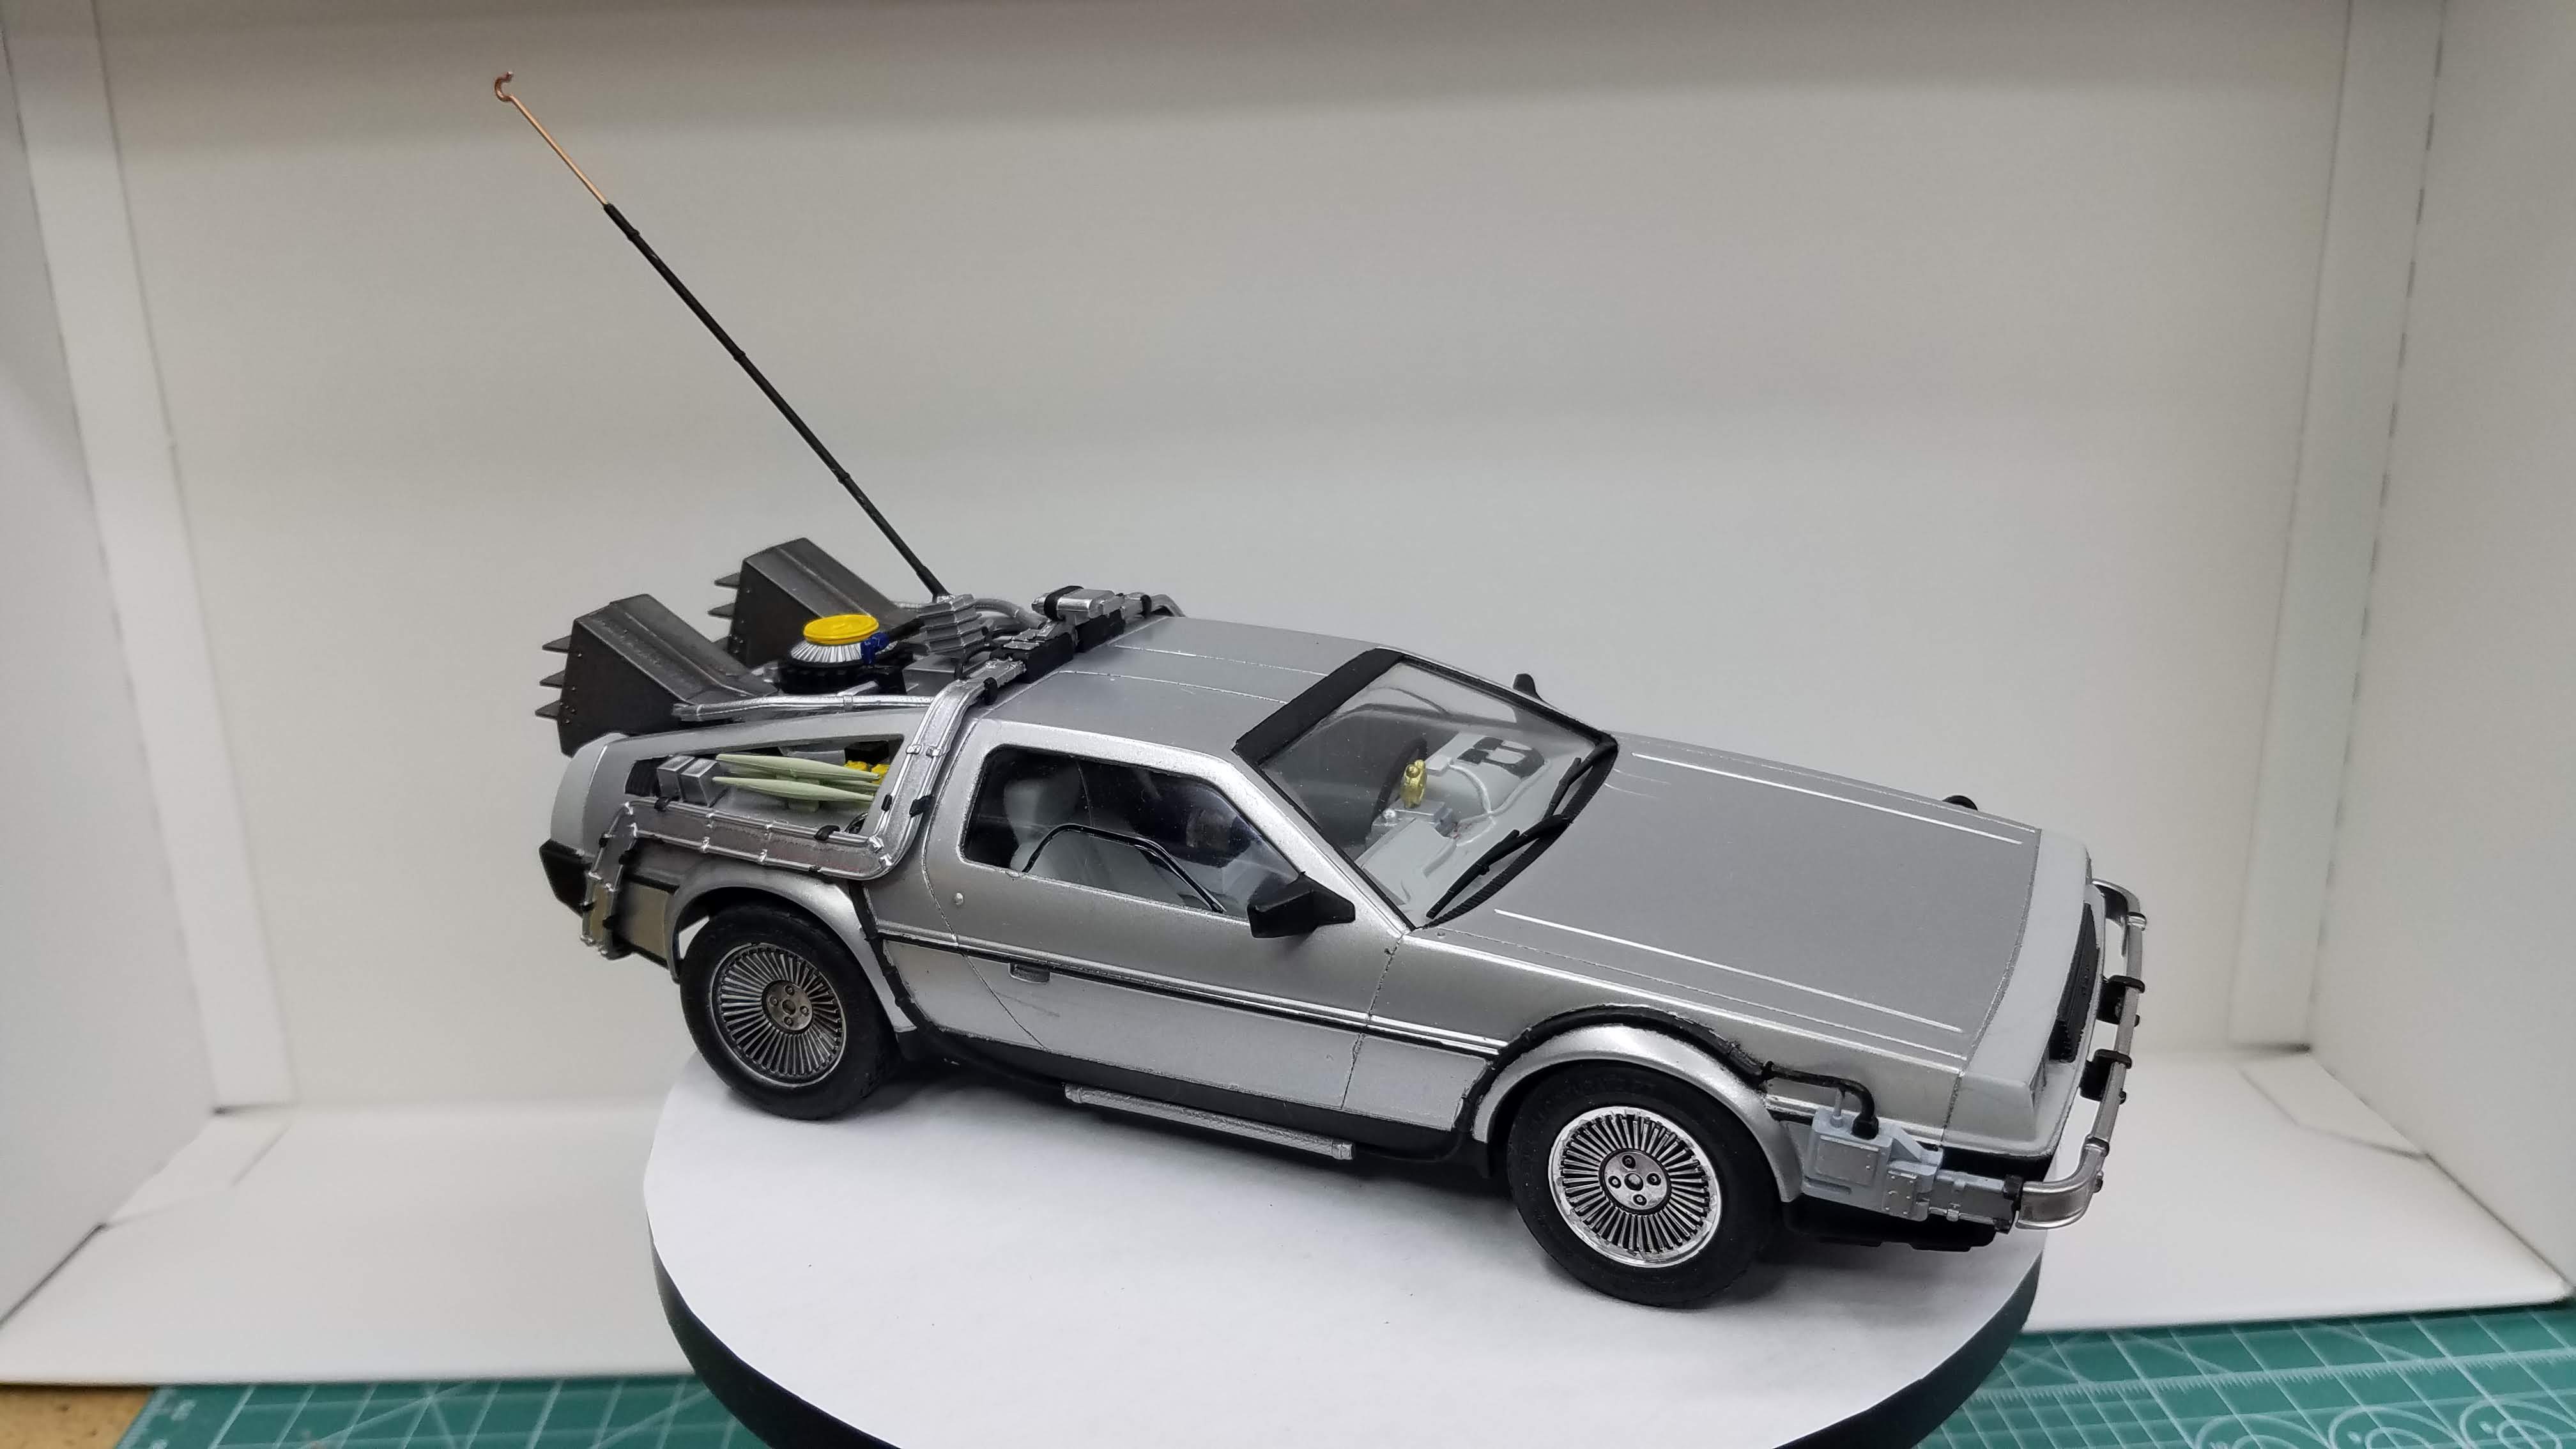 Back to the Future DeLorean from the first film